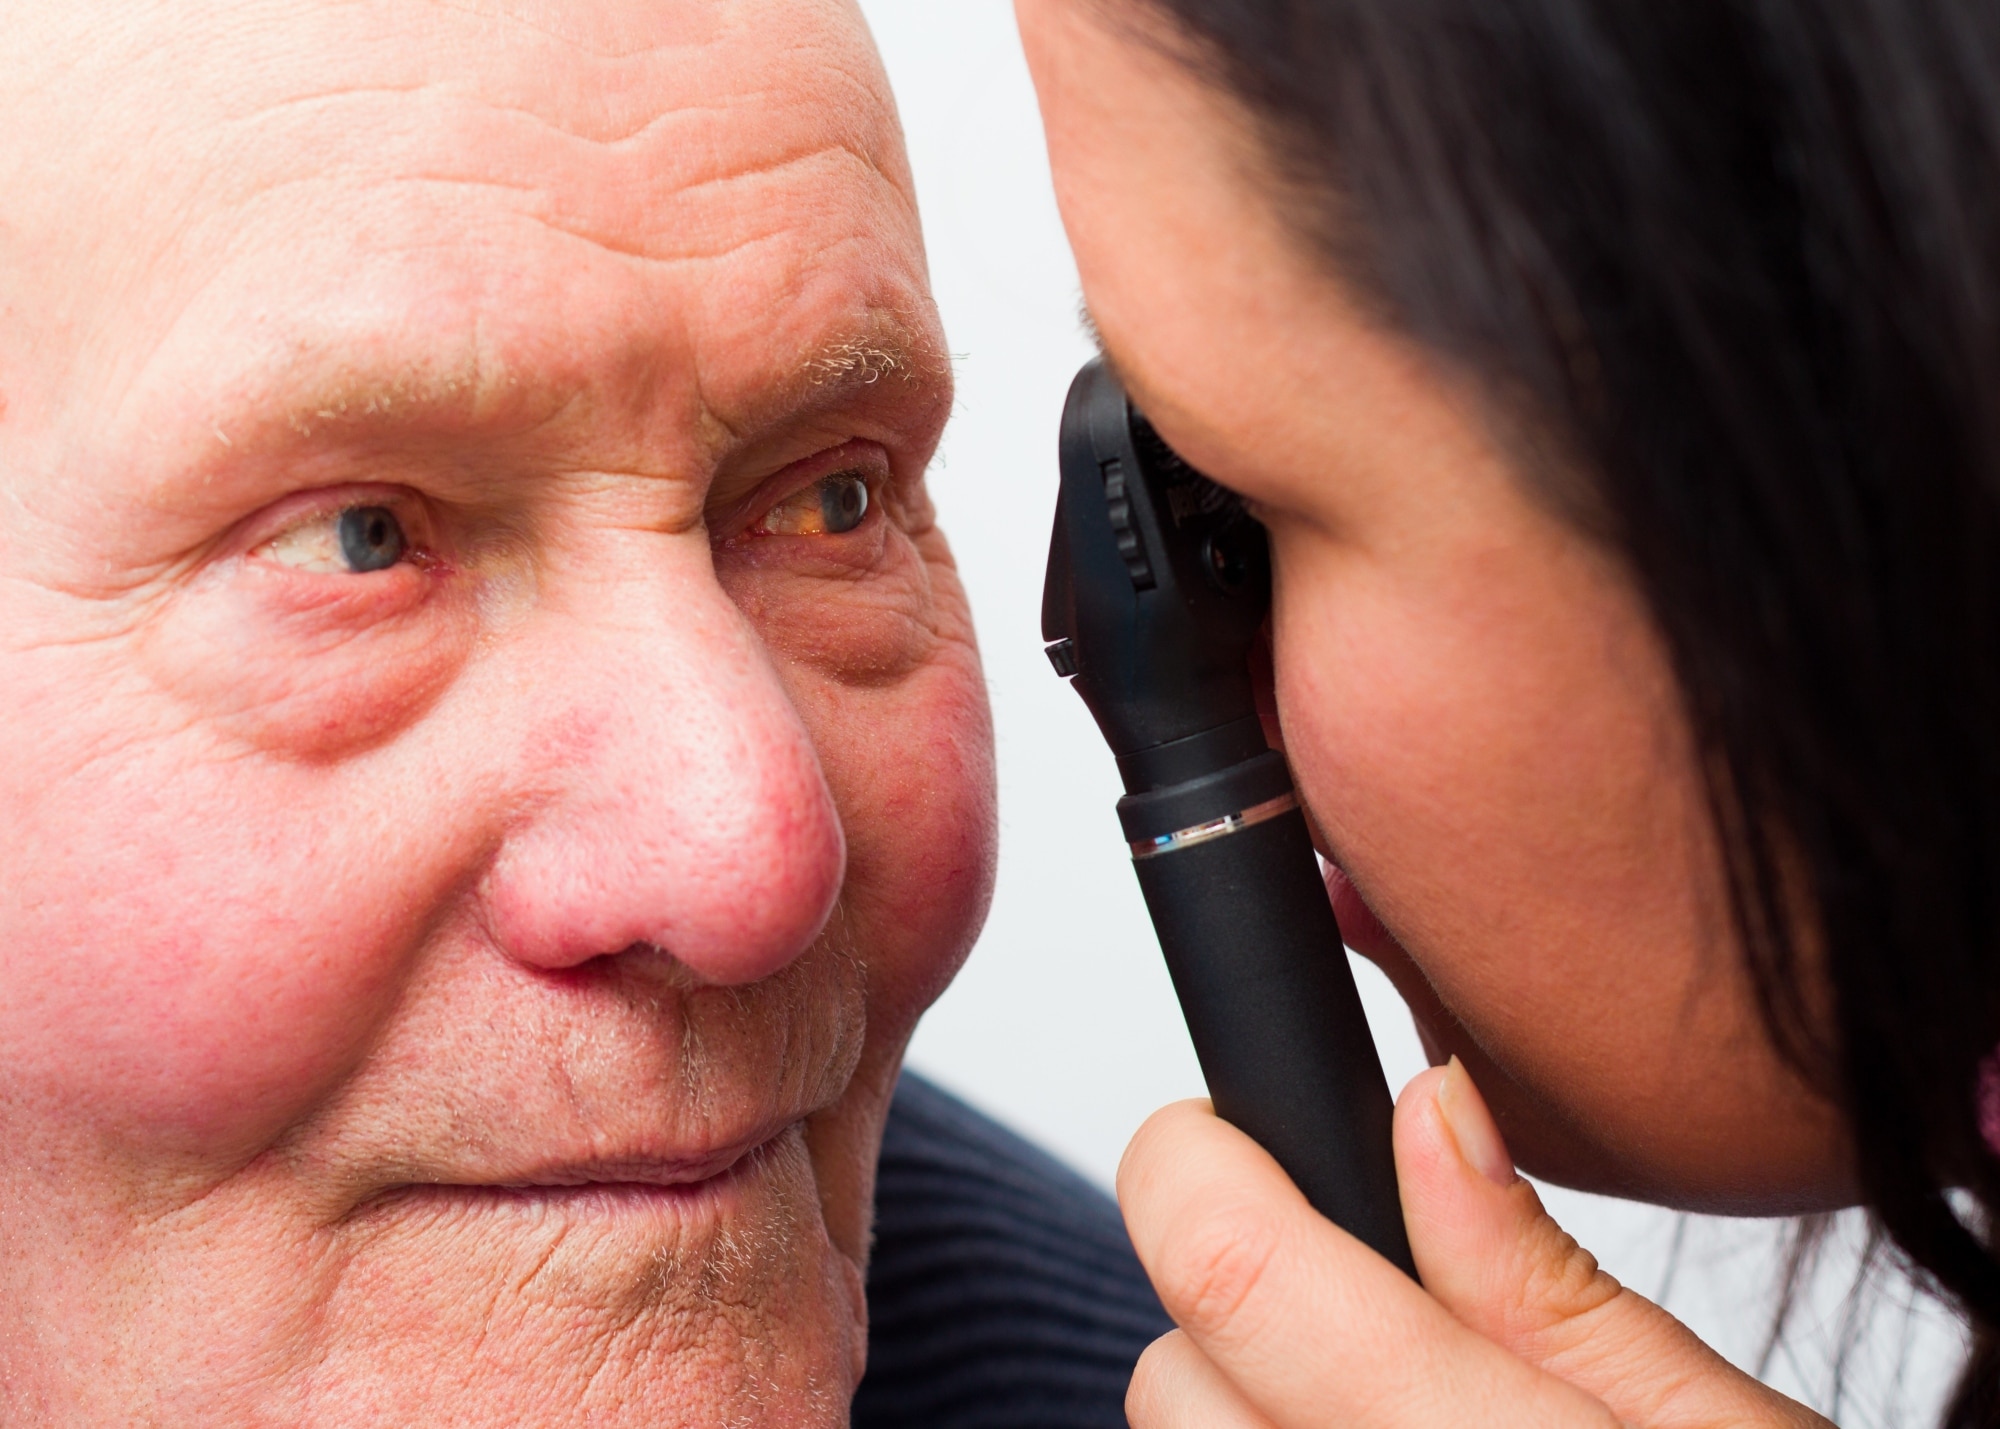 What Do You Need to Know About Eye Floaters in Elderly Adults?